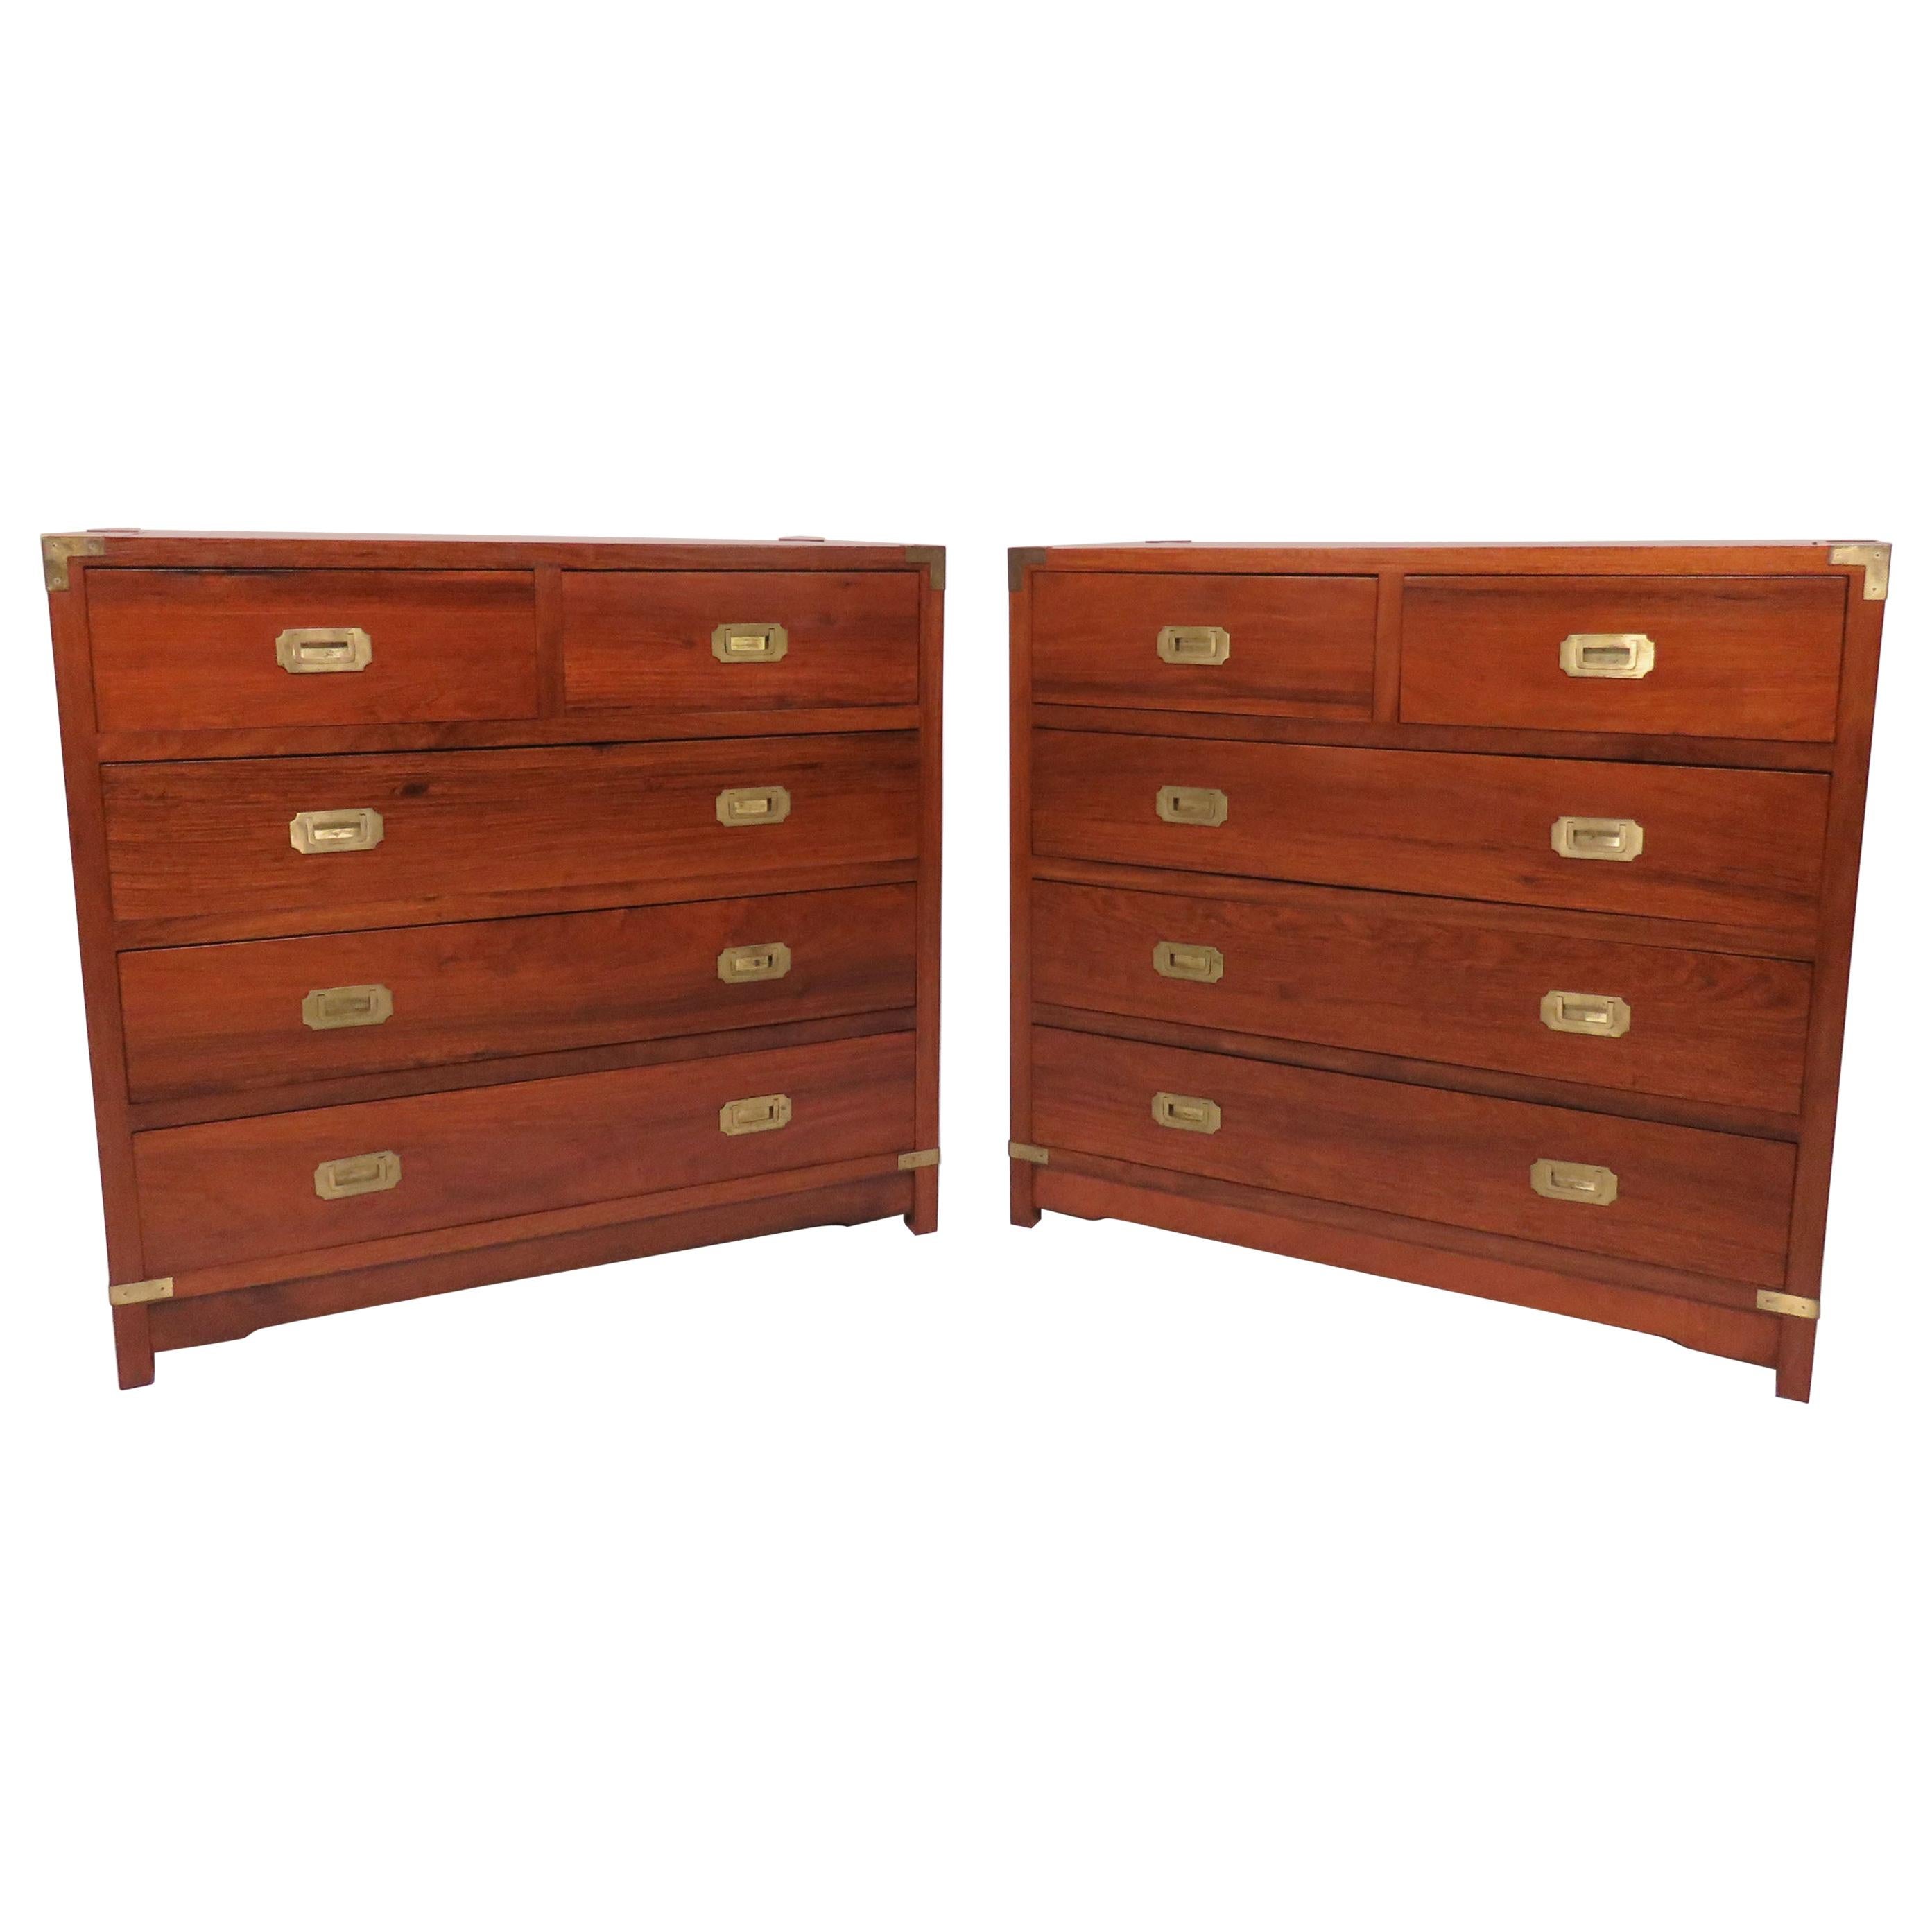 Pair of Mahogany Anglo-Indian Campaign Dressers with Brass Hardware, circa 1950s